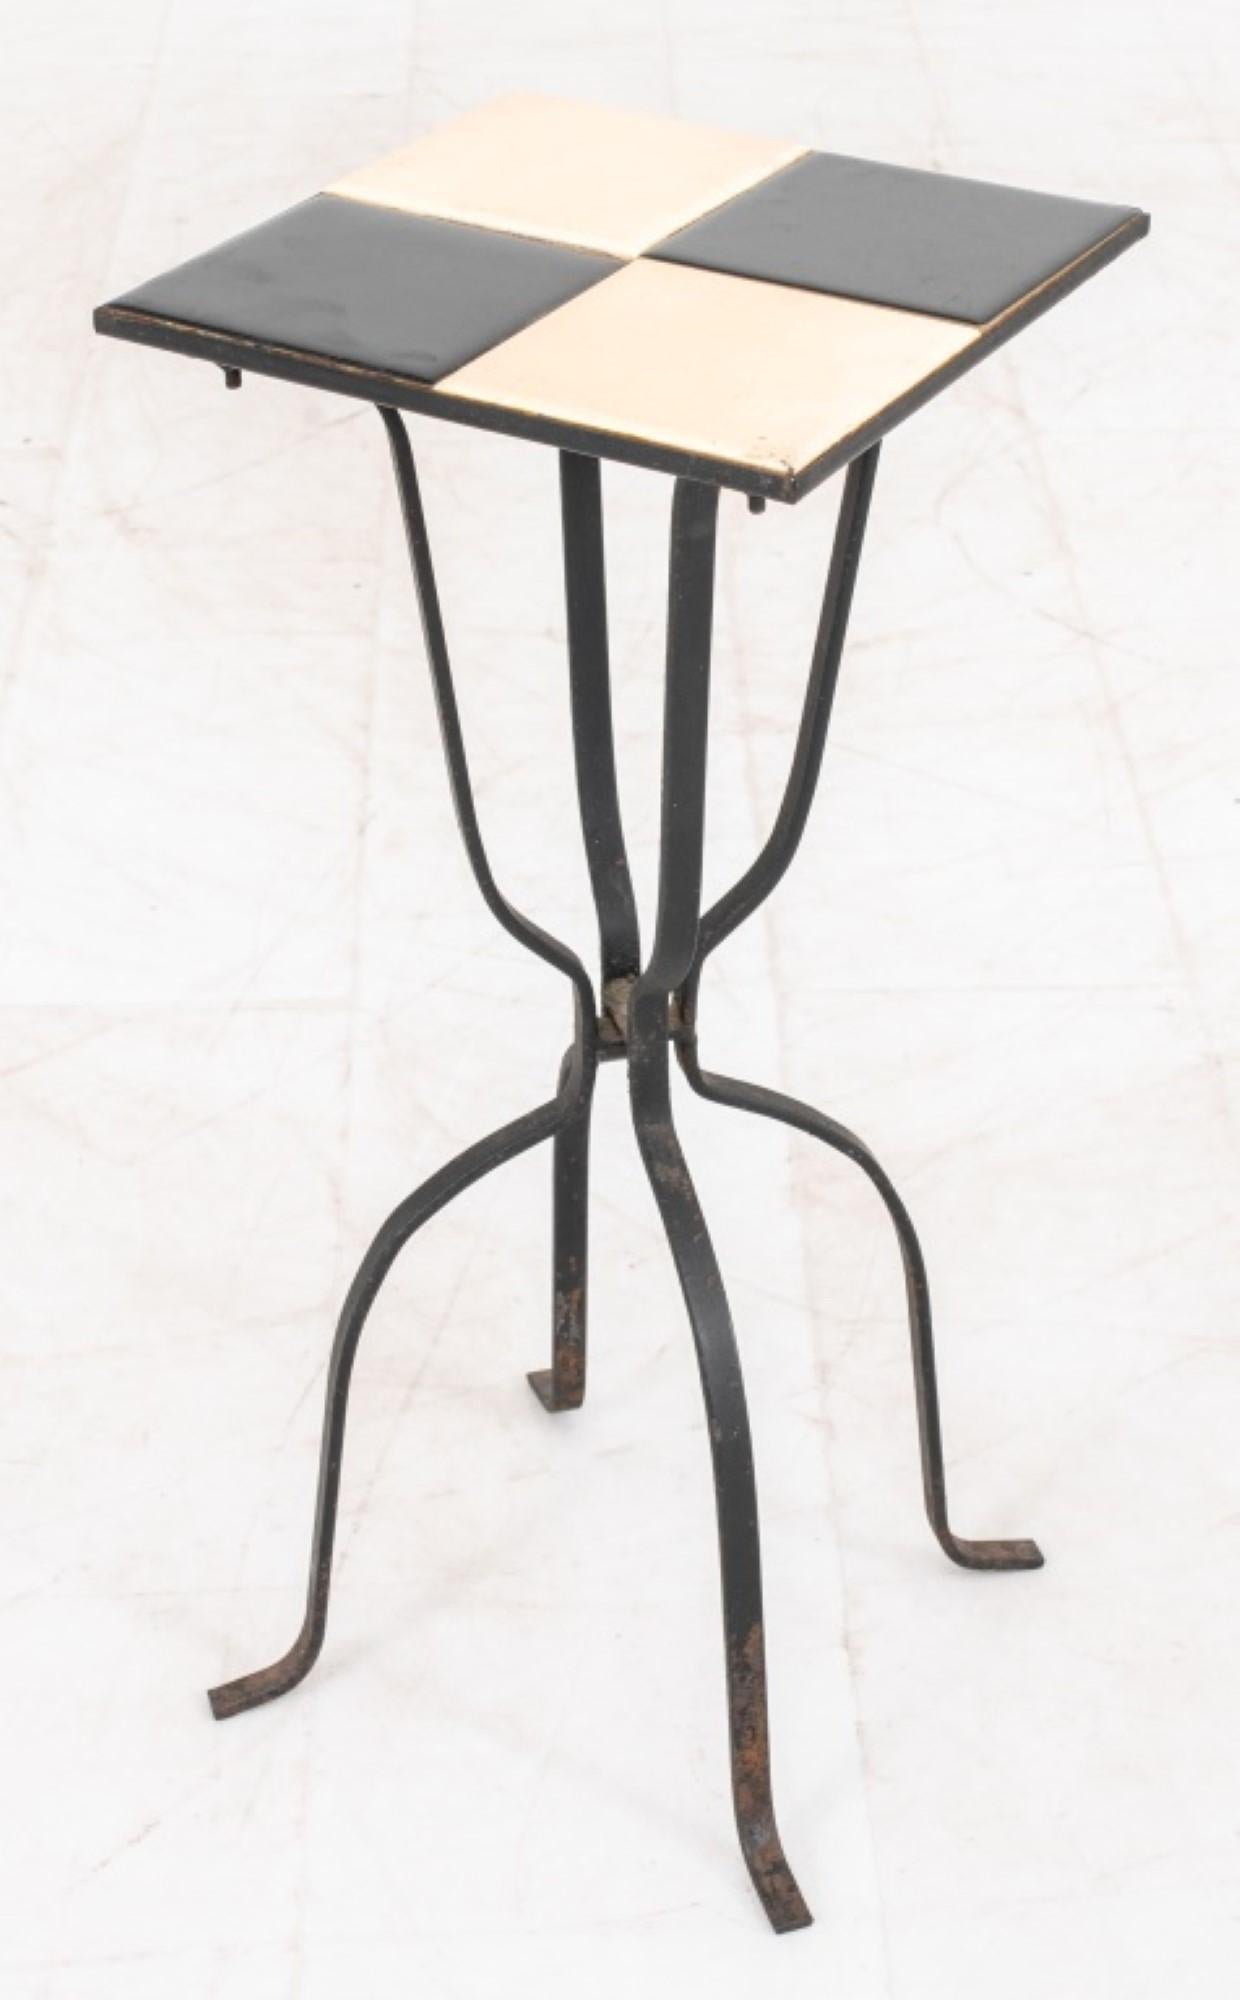 20th Century Ceramic Tile Top Iron Side Tables, 2 For Sale